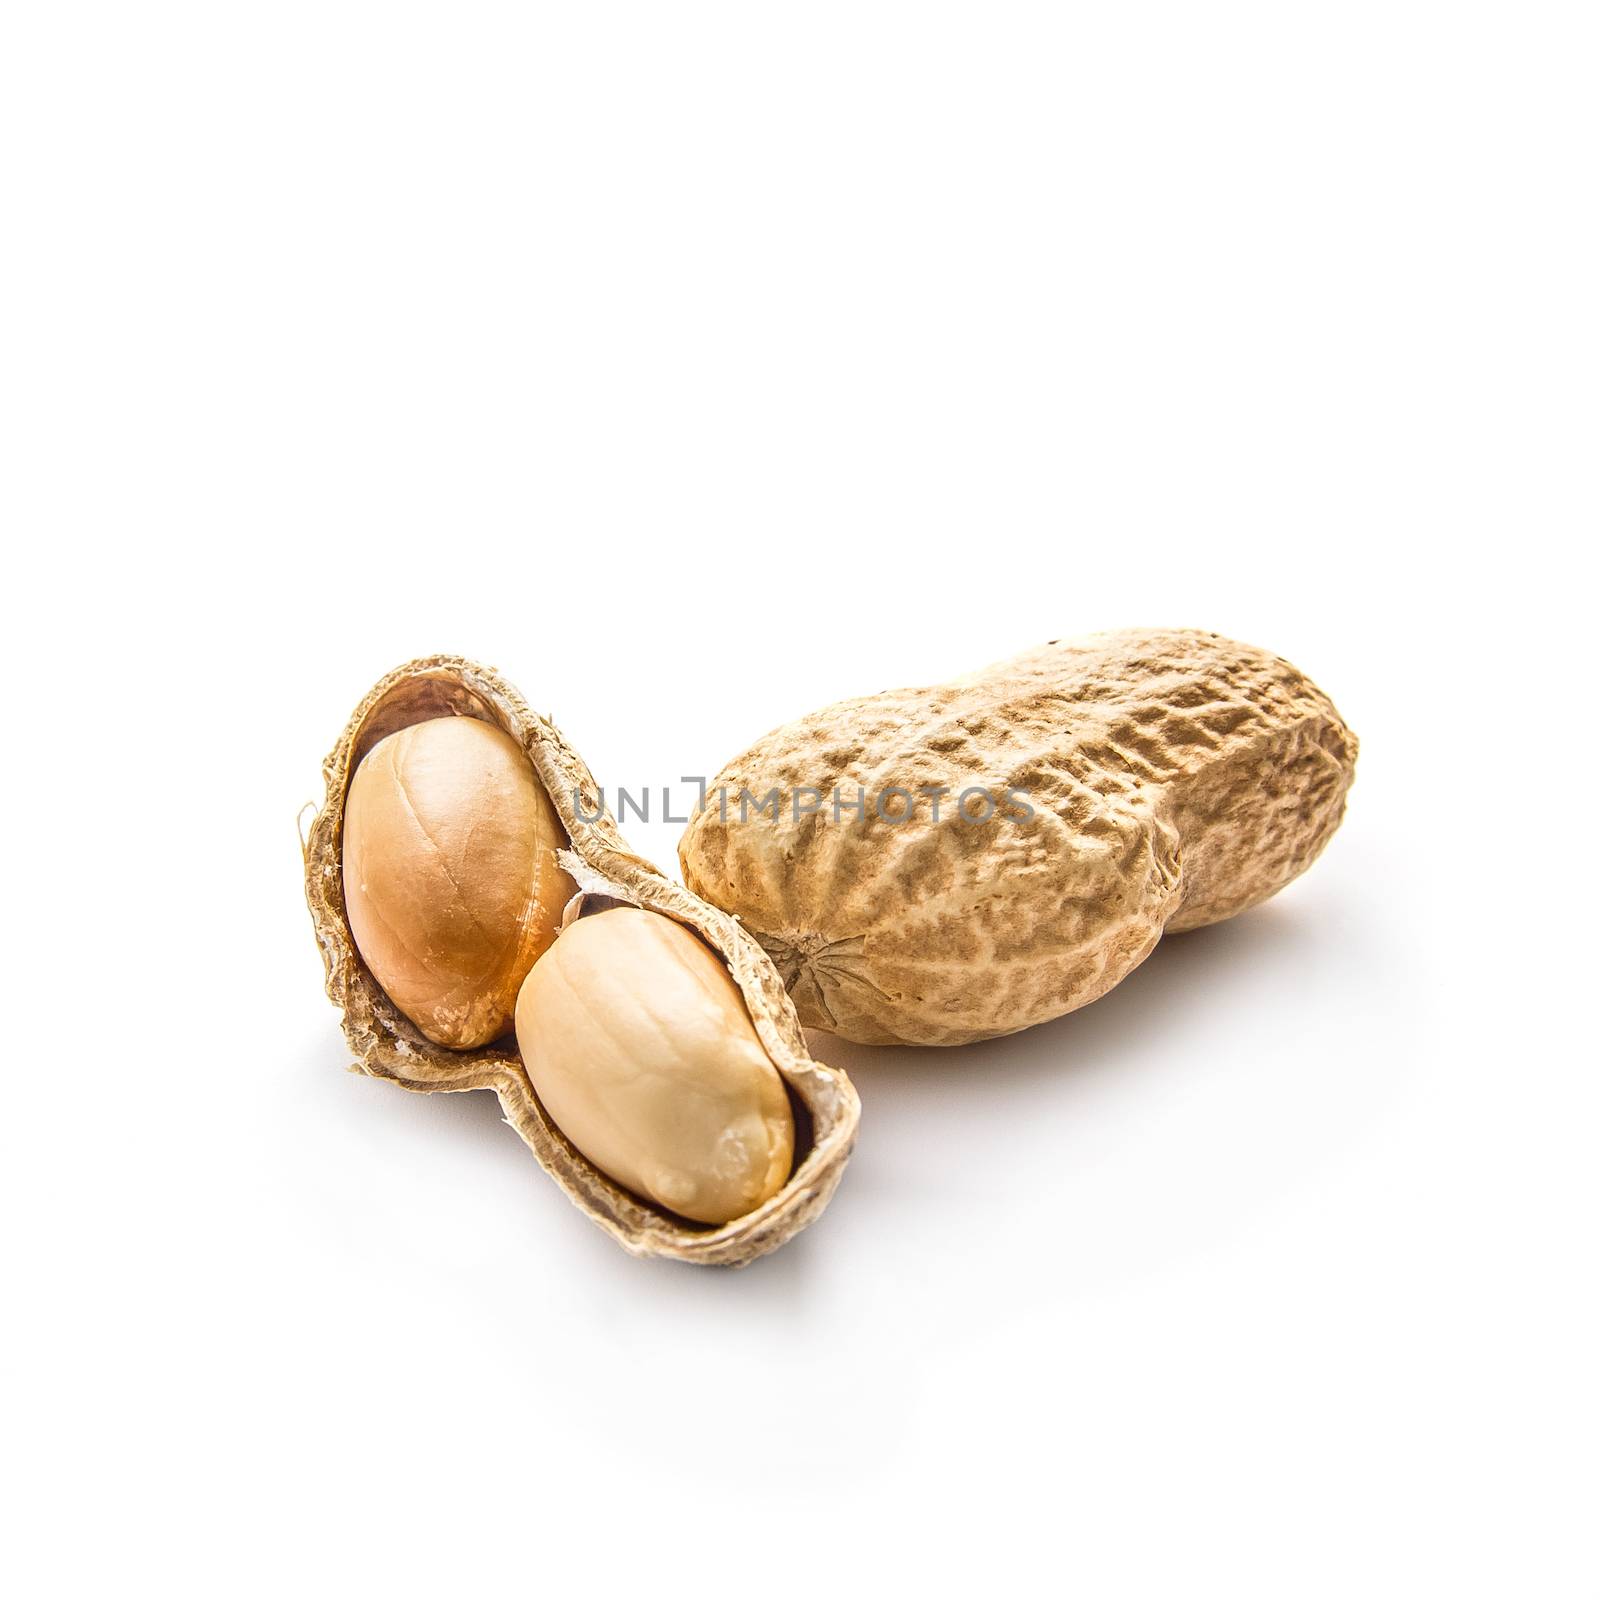 Peanuts isolated by dynamicfoto